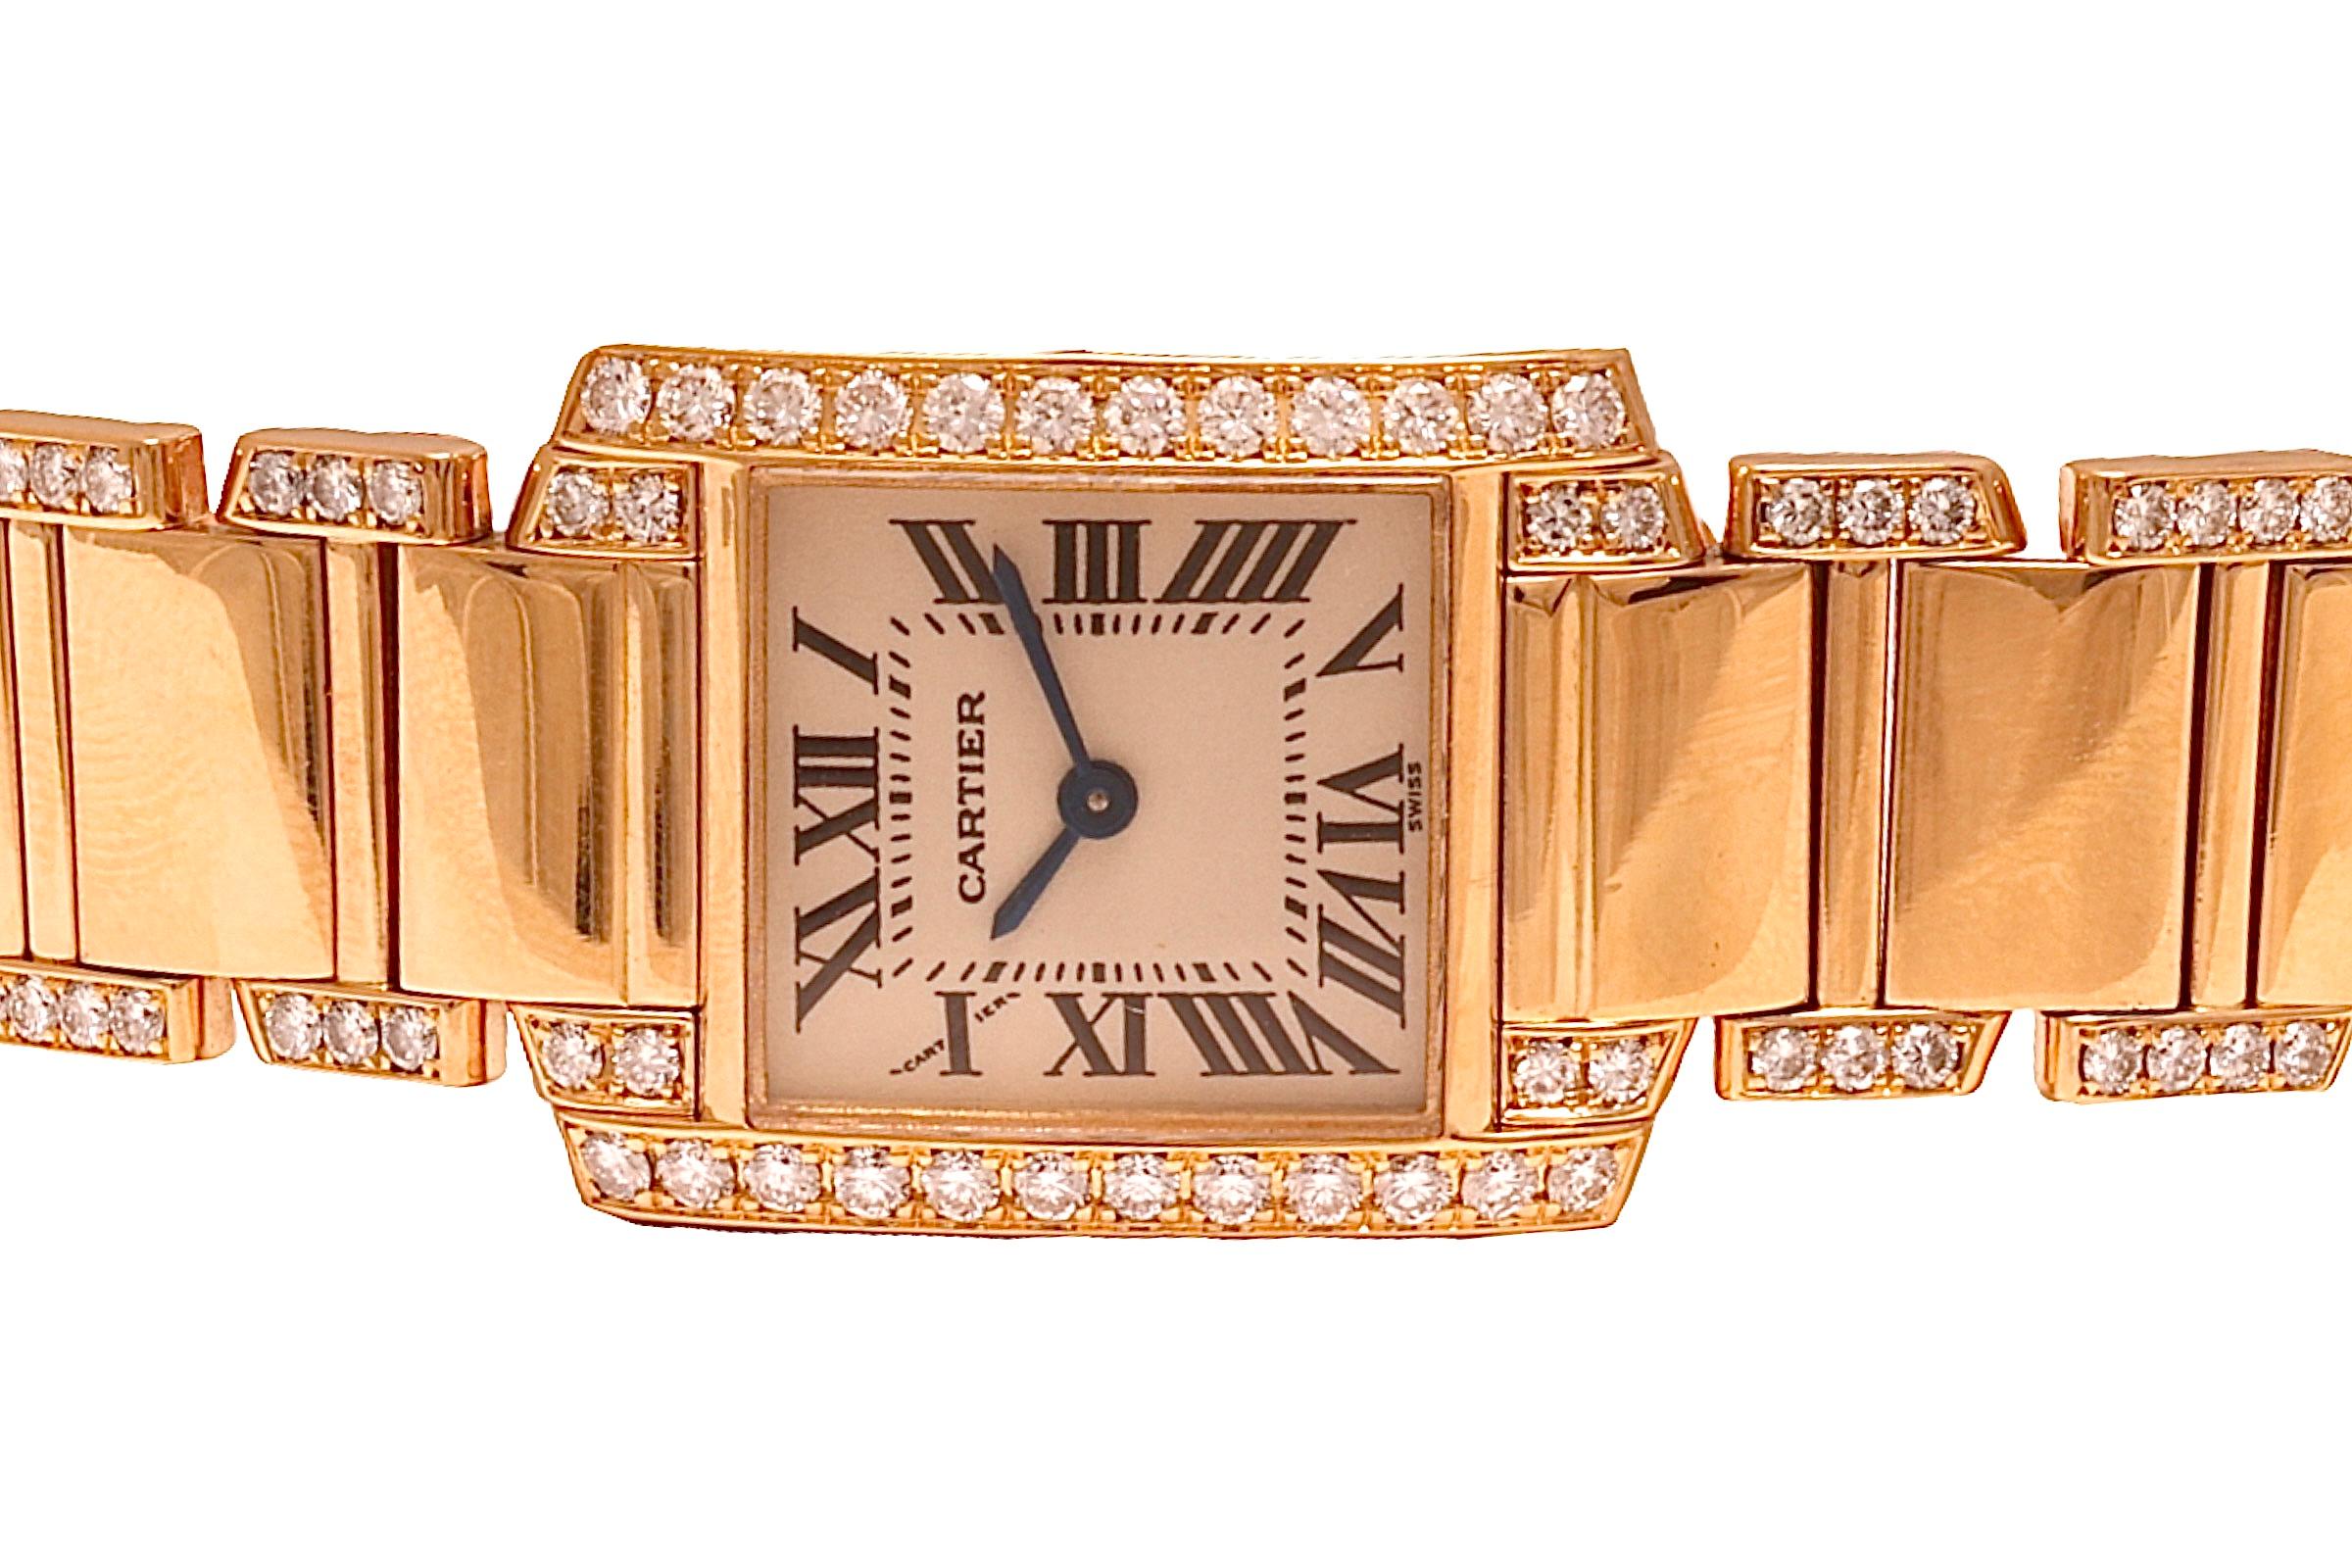 Brilliant Cut 18 kt. Yellow Gold Cartier tank Francaise 2385 With Box and Papers For Sale